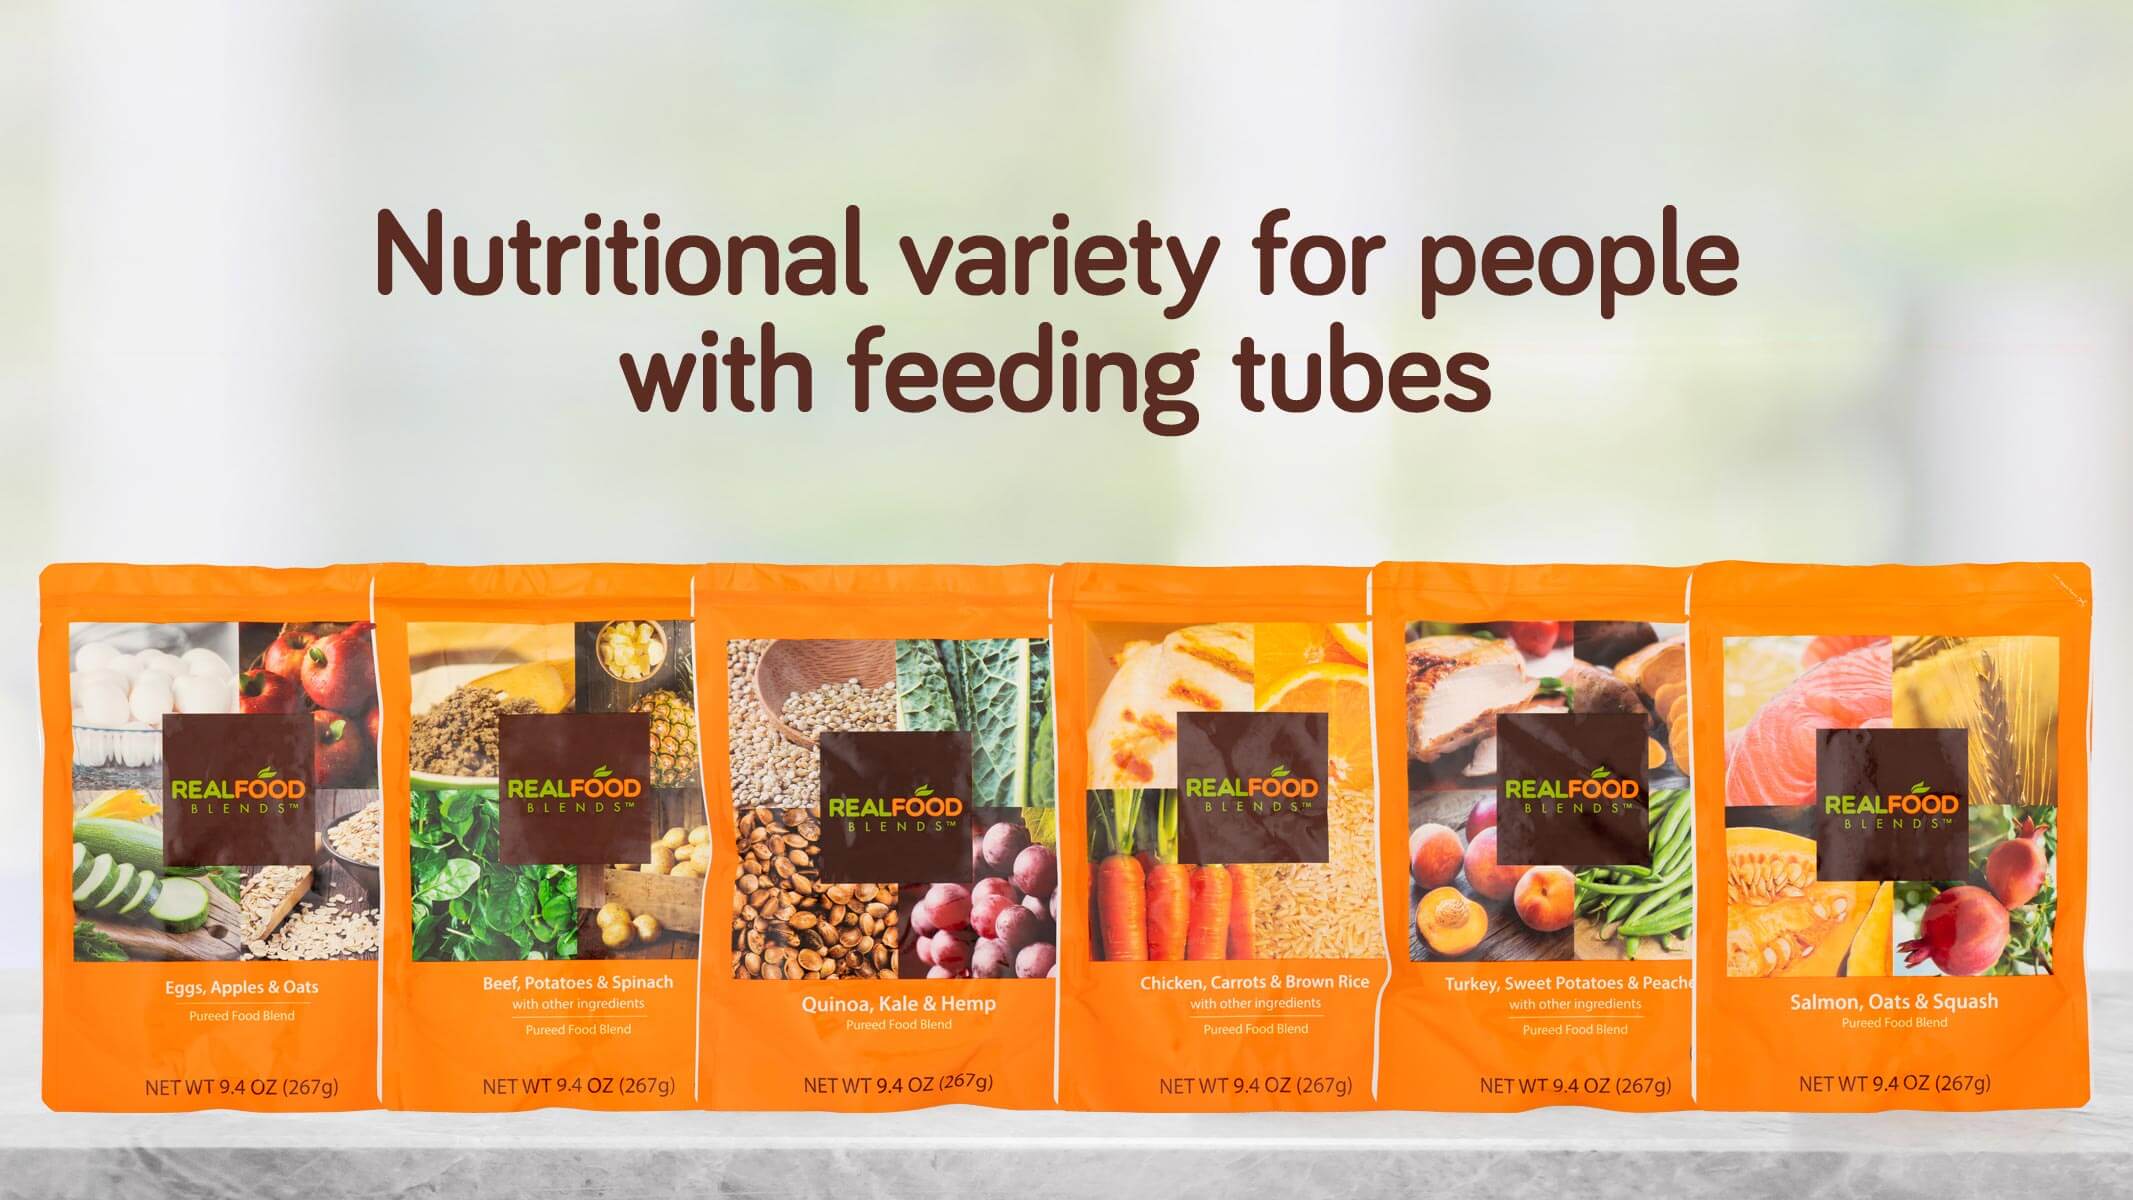 How To Use Real Food Blends Meals for People with Feeding Tubes 